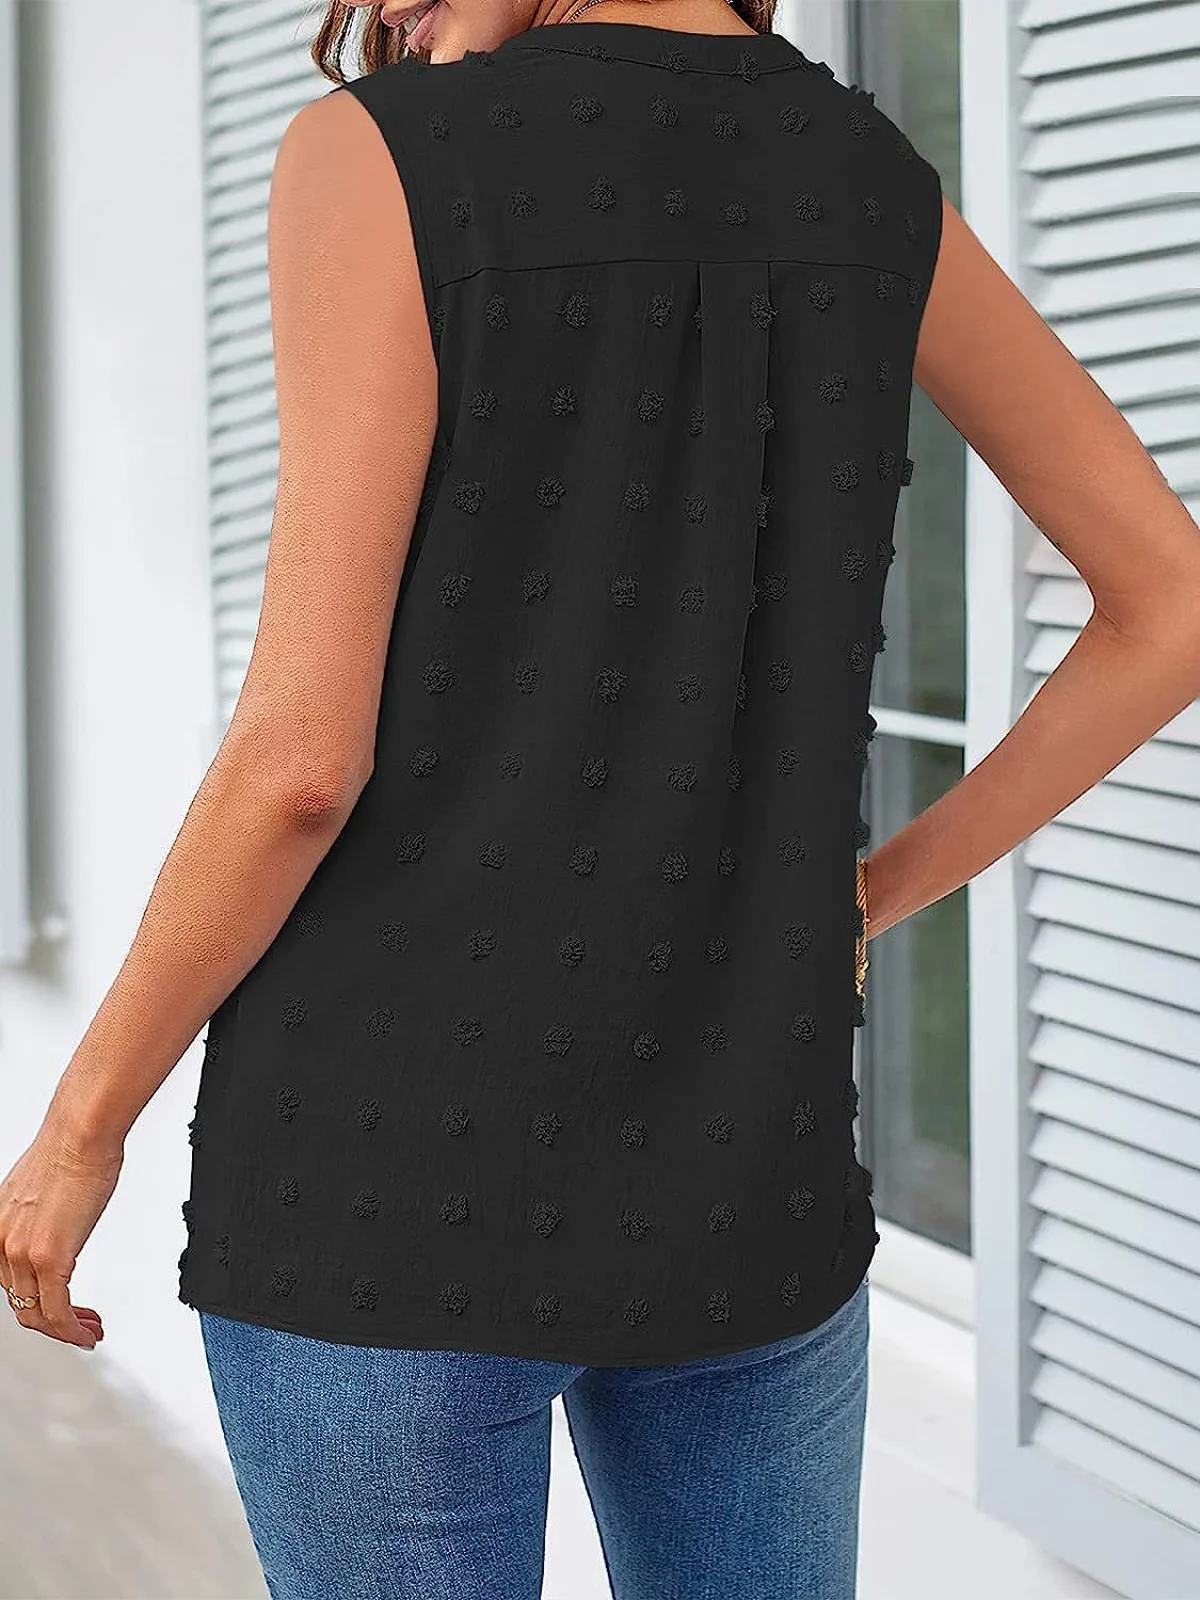 Casual Notched Plain Tank Top